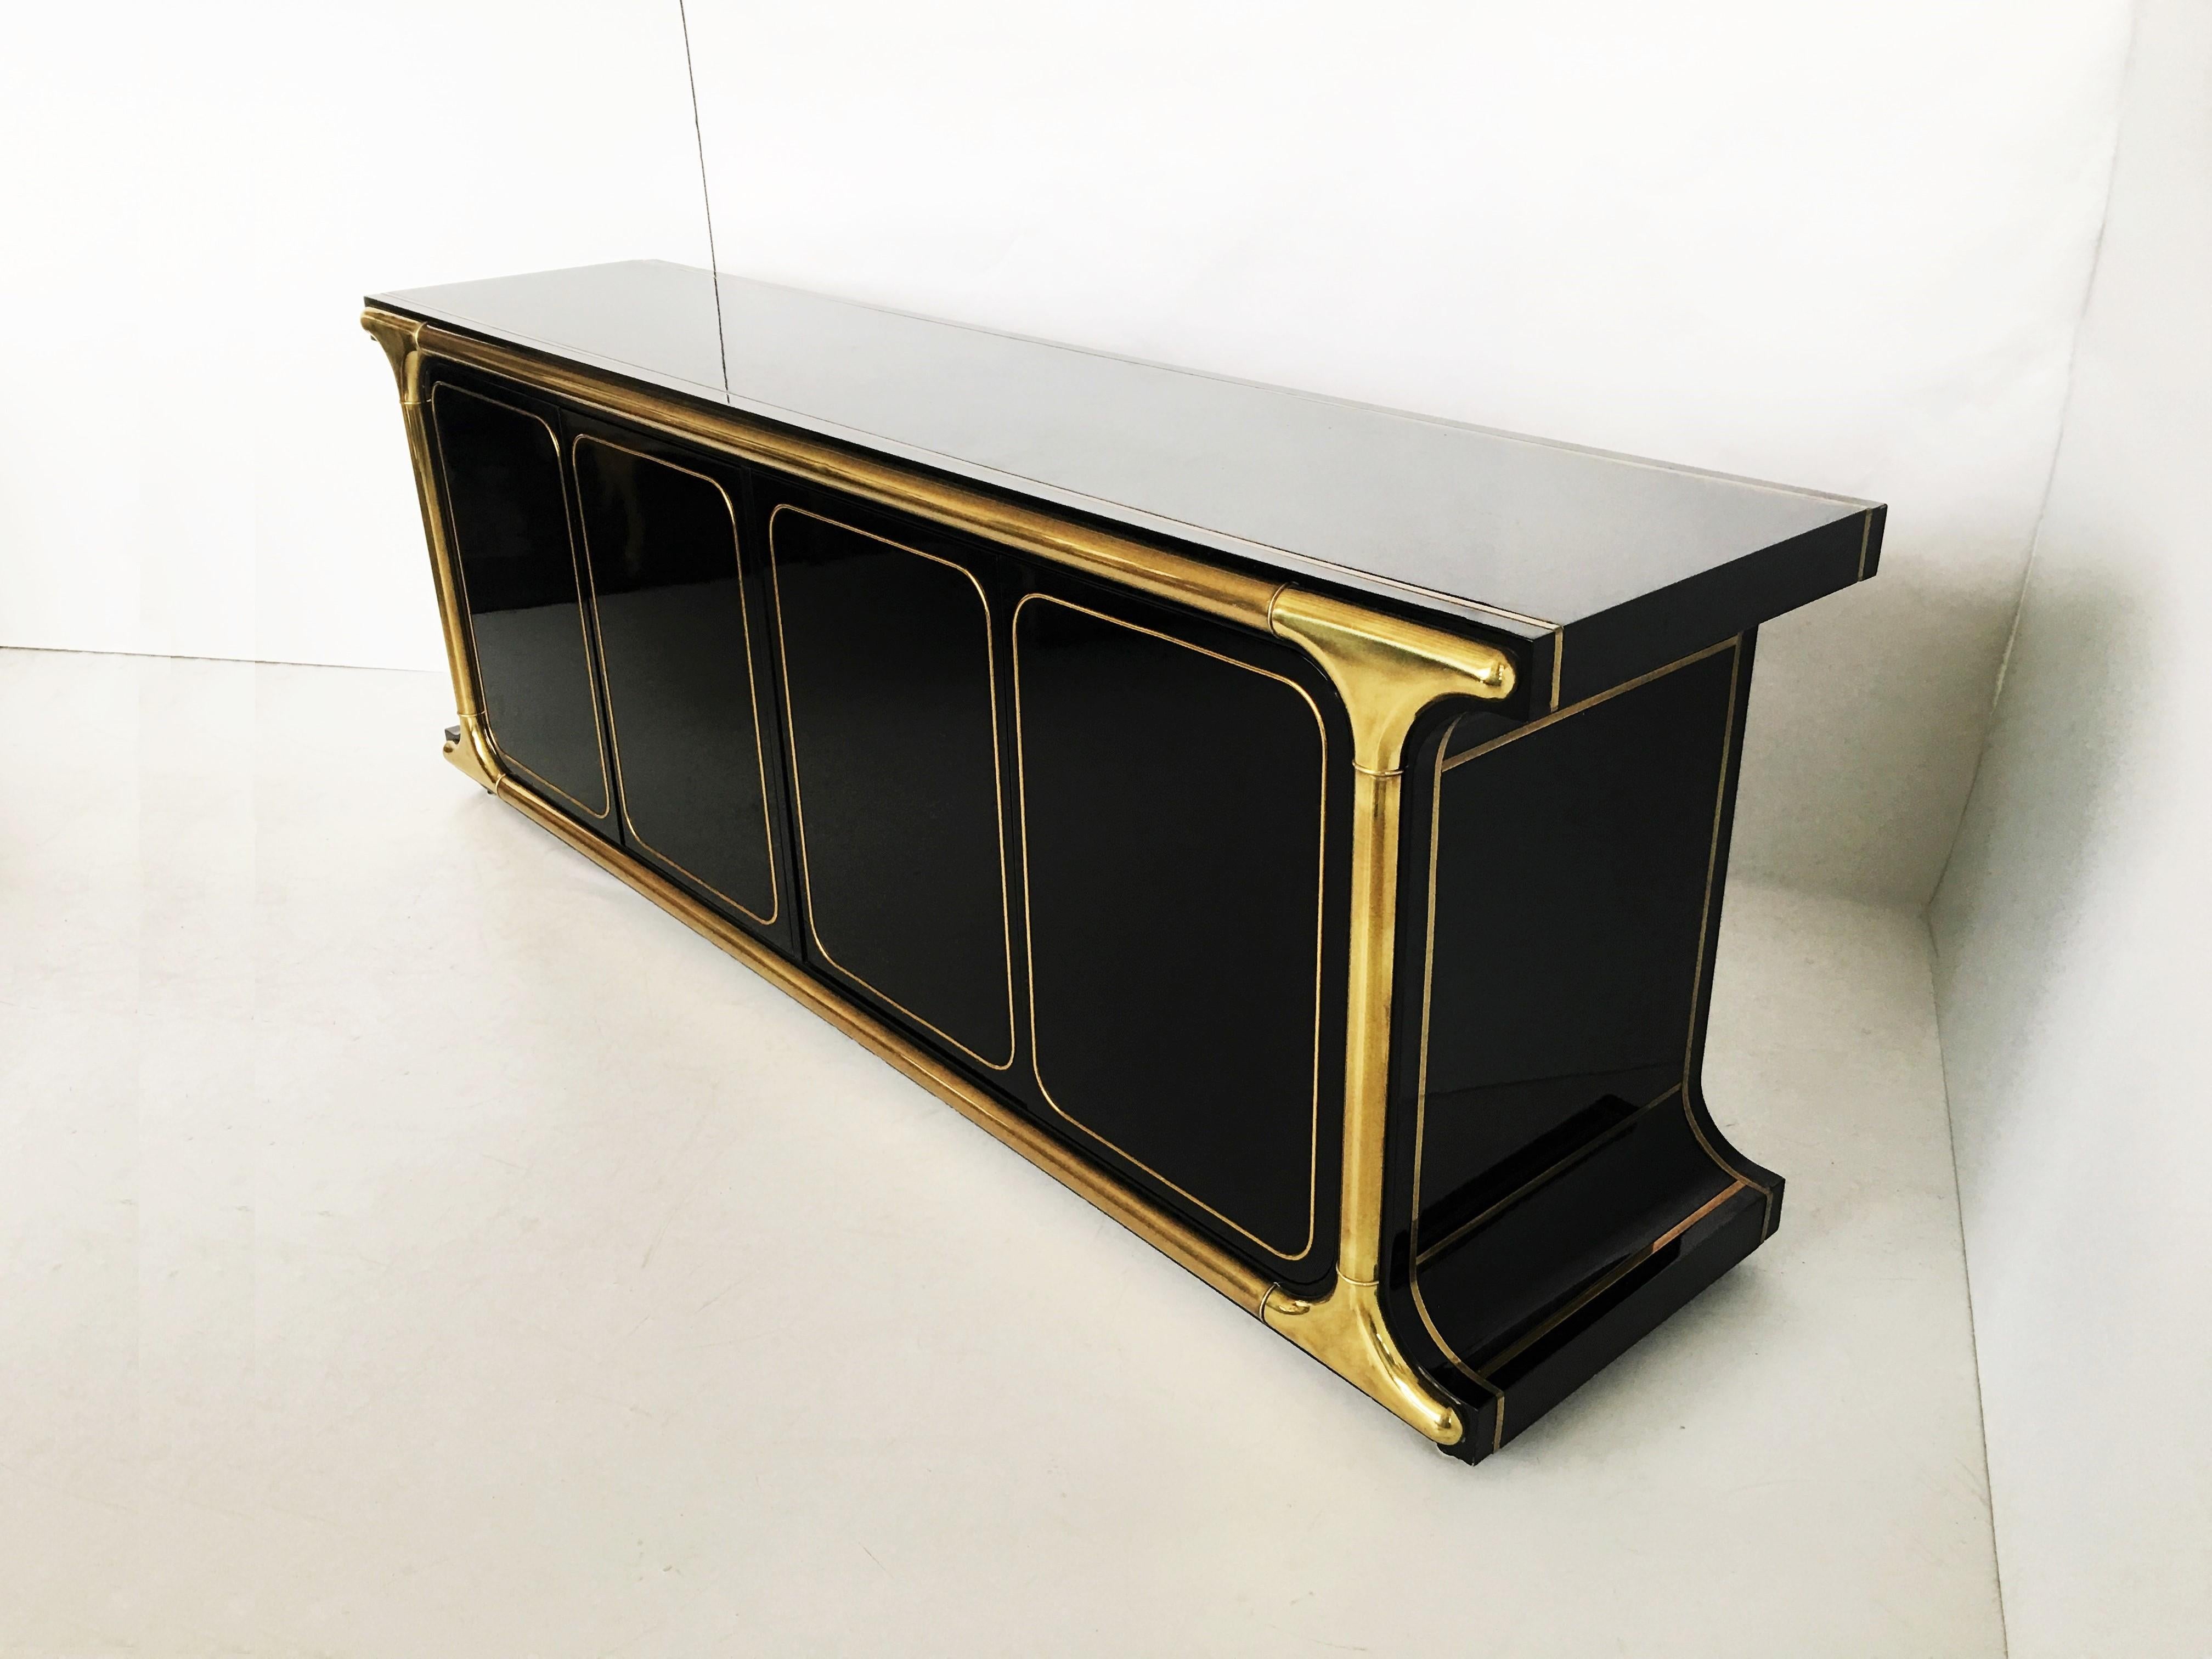 Glamorous Mastercraft Black Lacquer and Brass Credenza In Good Condition For Sale In Dallas, TX